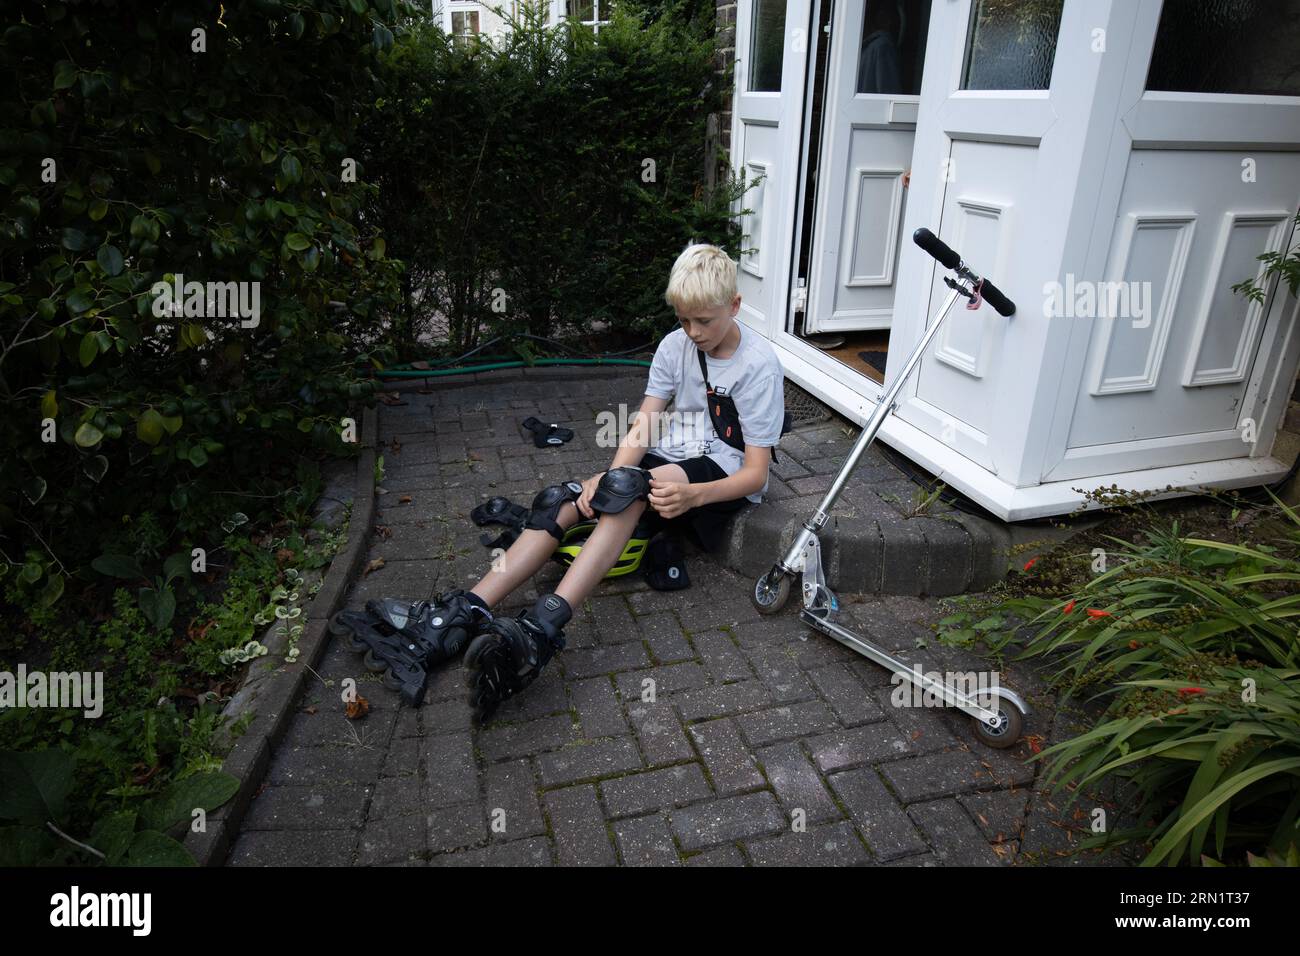 12 year-old boy outside his residential home putting on his roller blades, England, United Kingdom Stock Photo